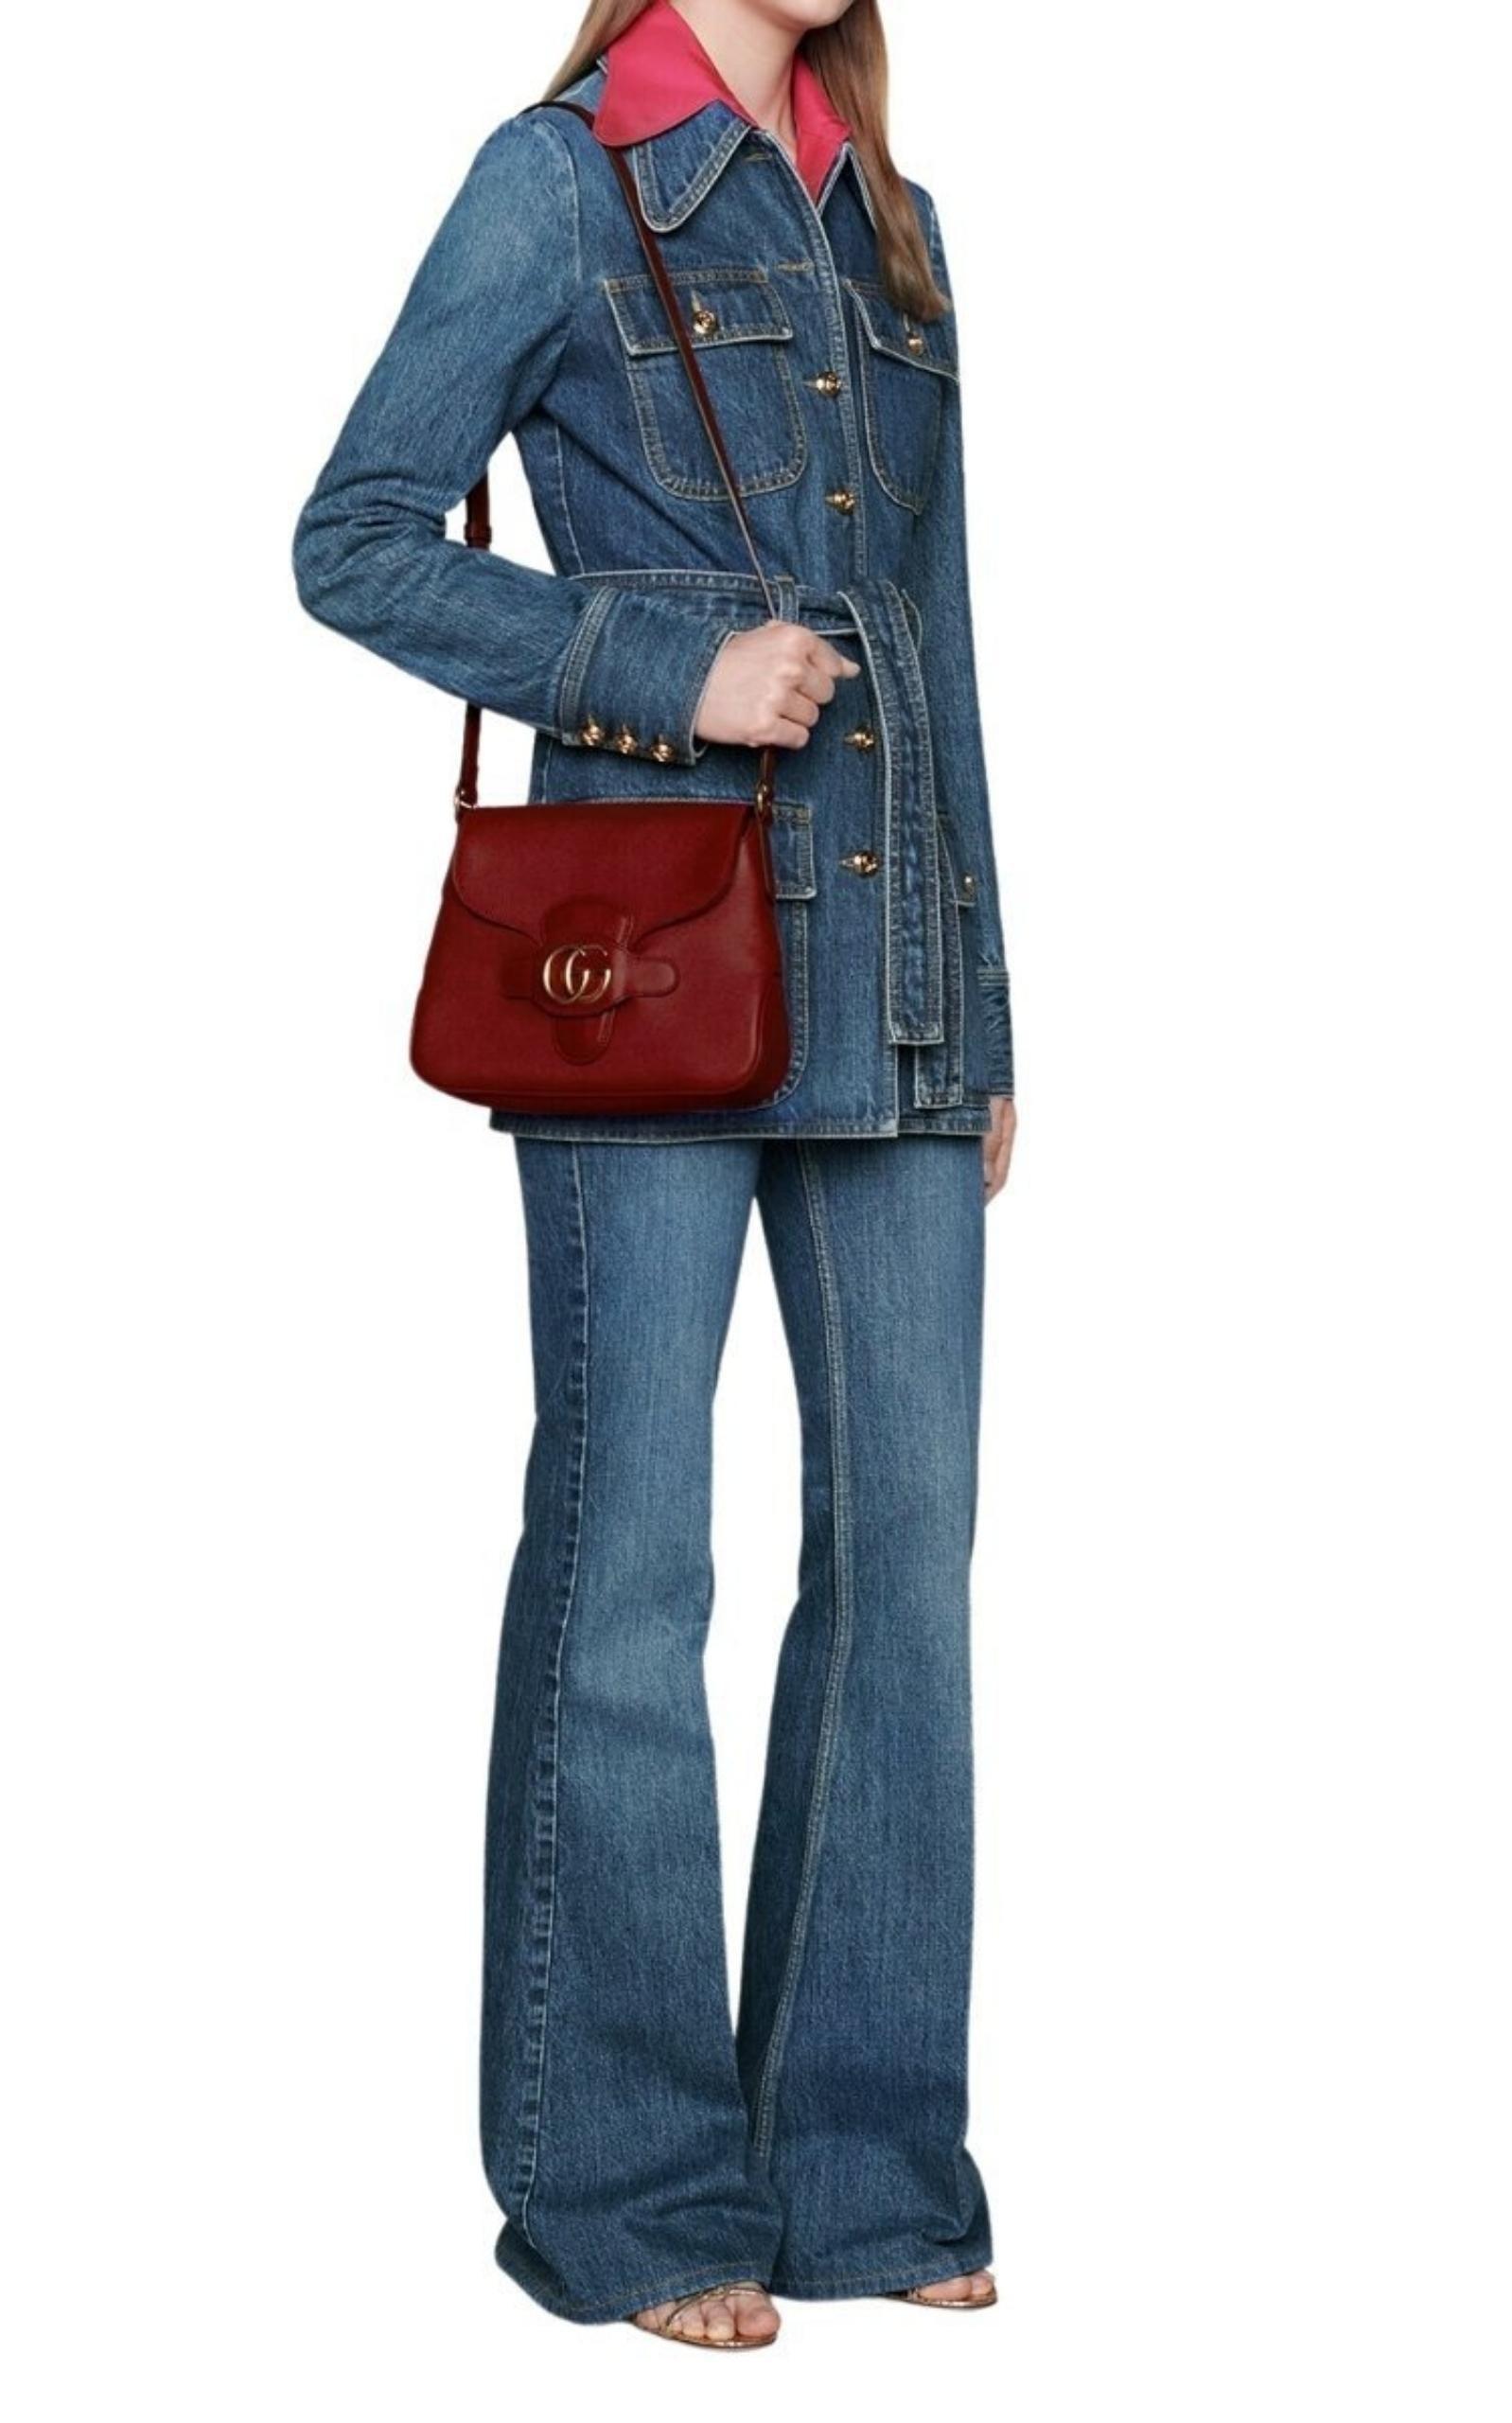  GucciSmall Messenger with Double GG Bag in Red - Runway Catalog